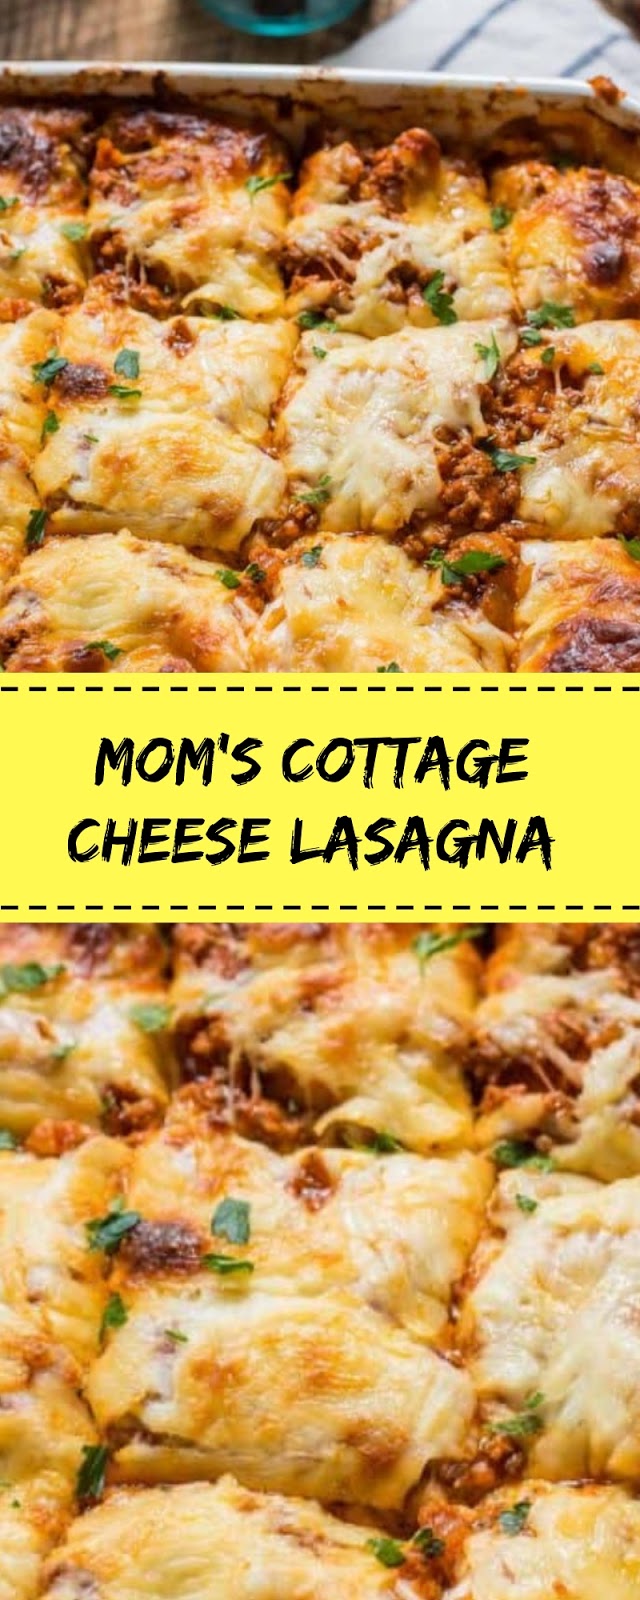 Mom’s Cottage Cheese Lasagna | Delicious My Food